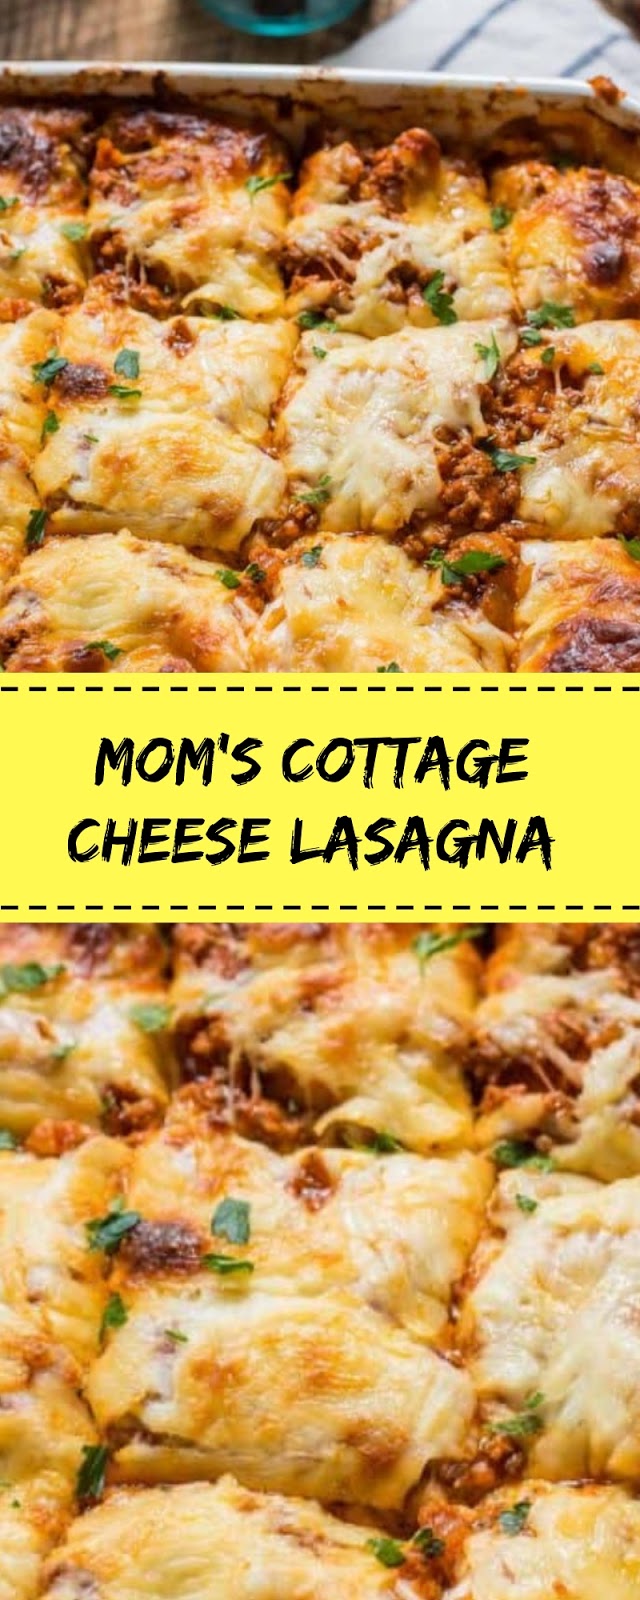 Mom’s Cottage Cheese Lasagna | Delicious My Food